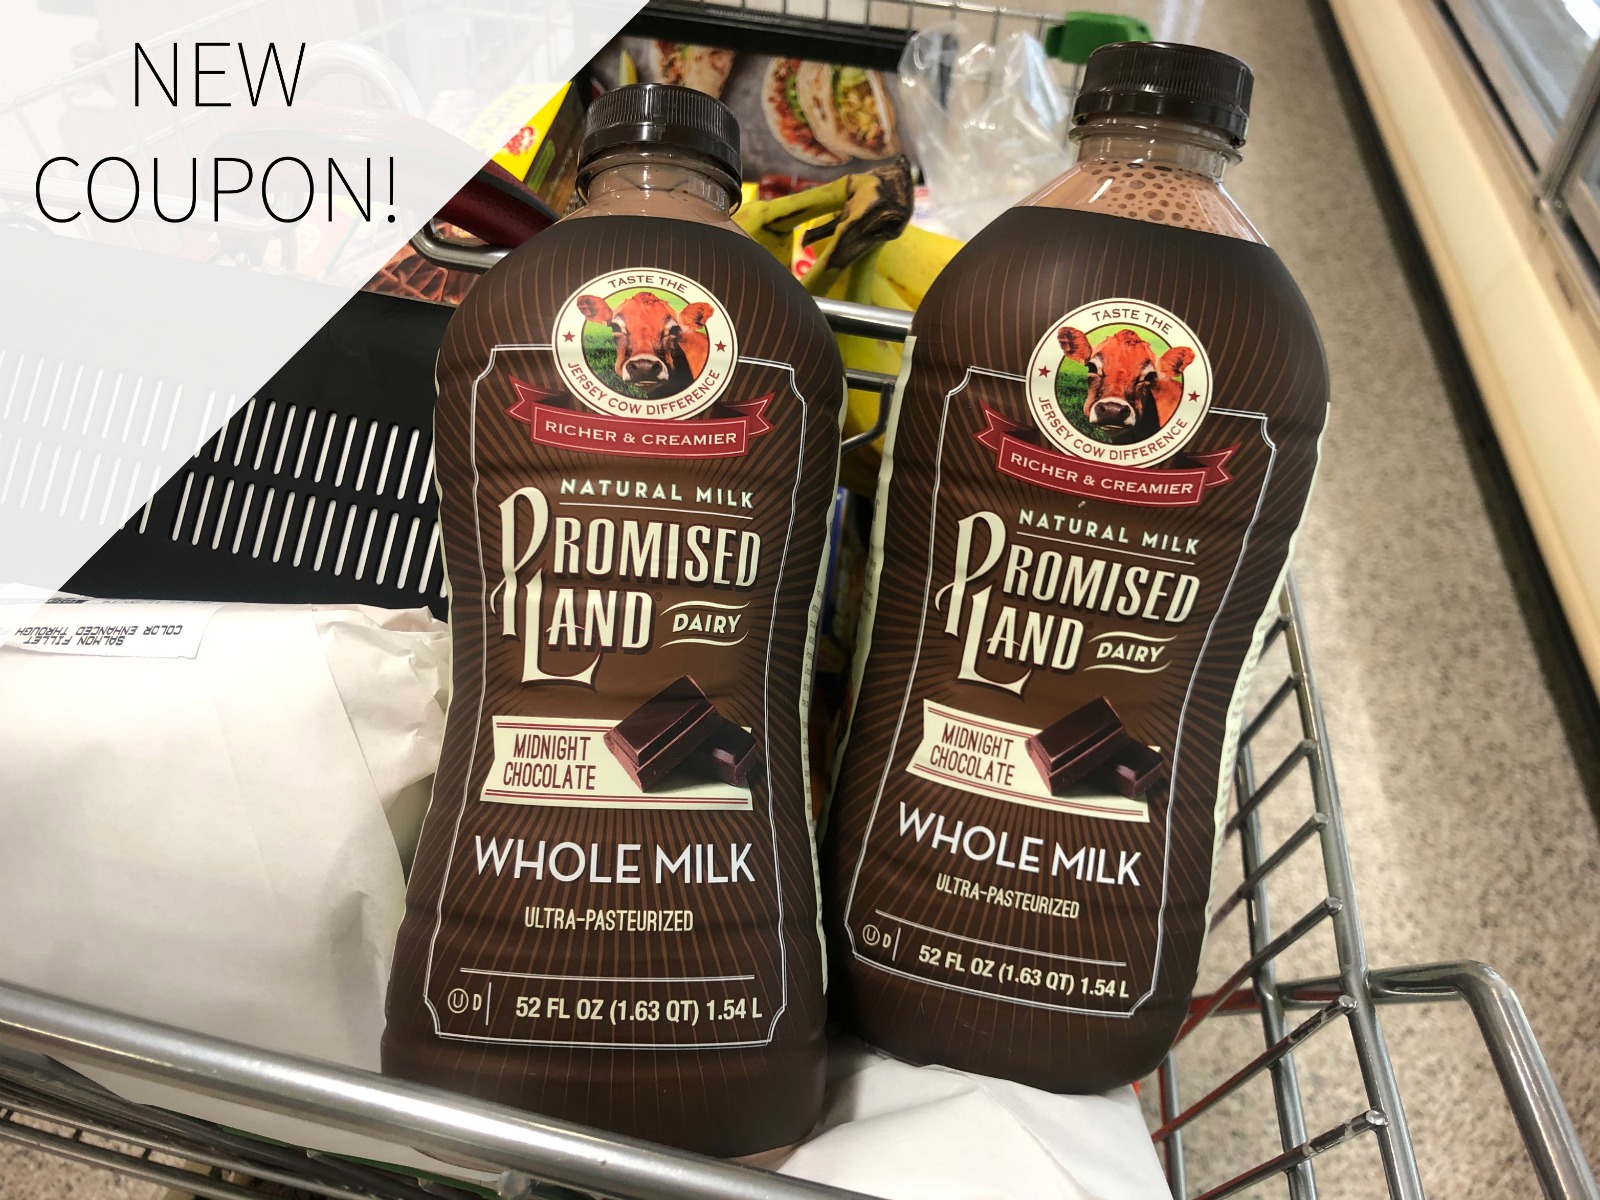 Save $2 On Promised Land Milk At Publix – Load The High Value Coupon!